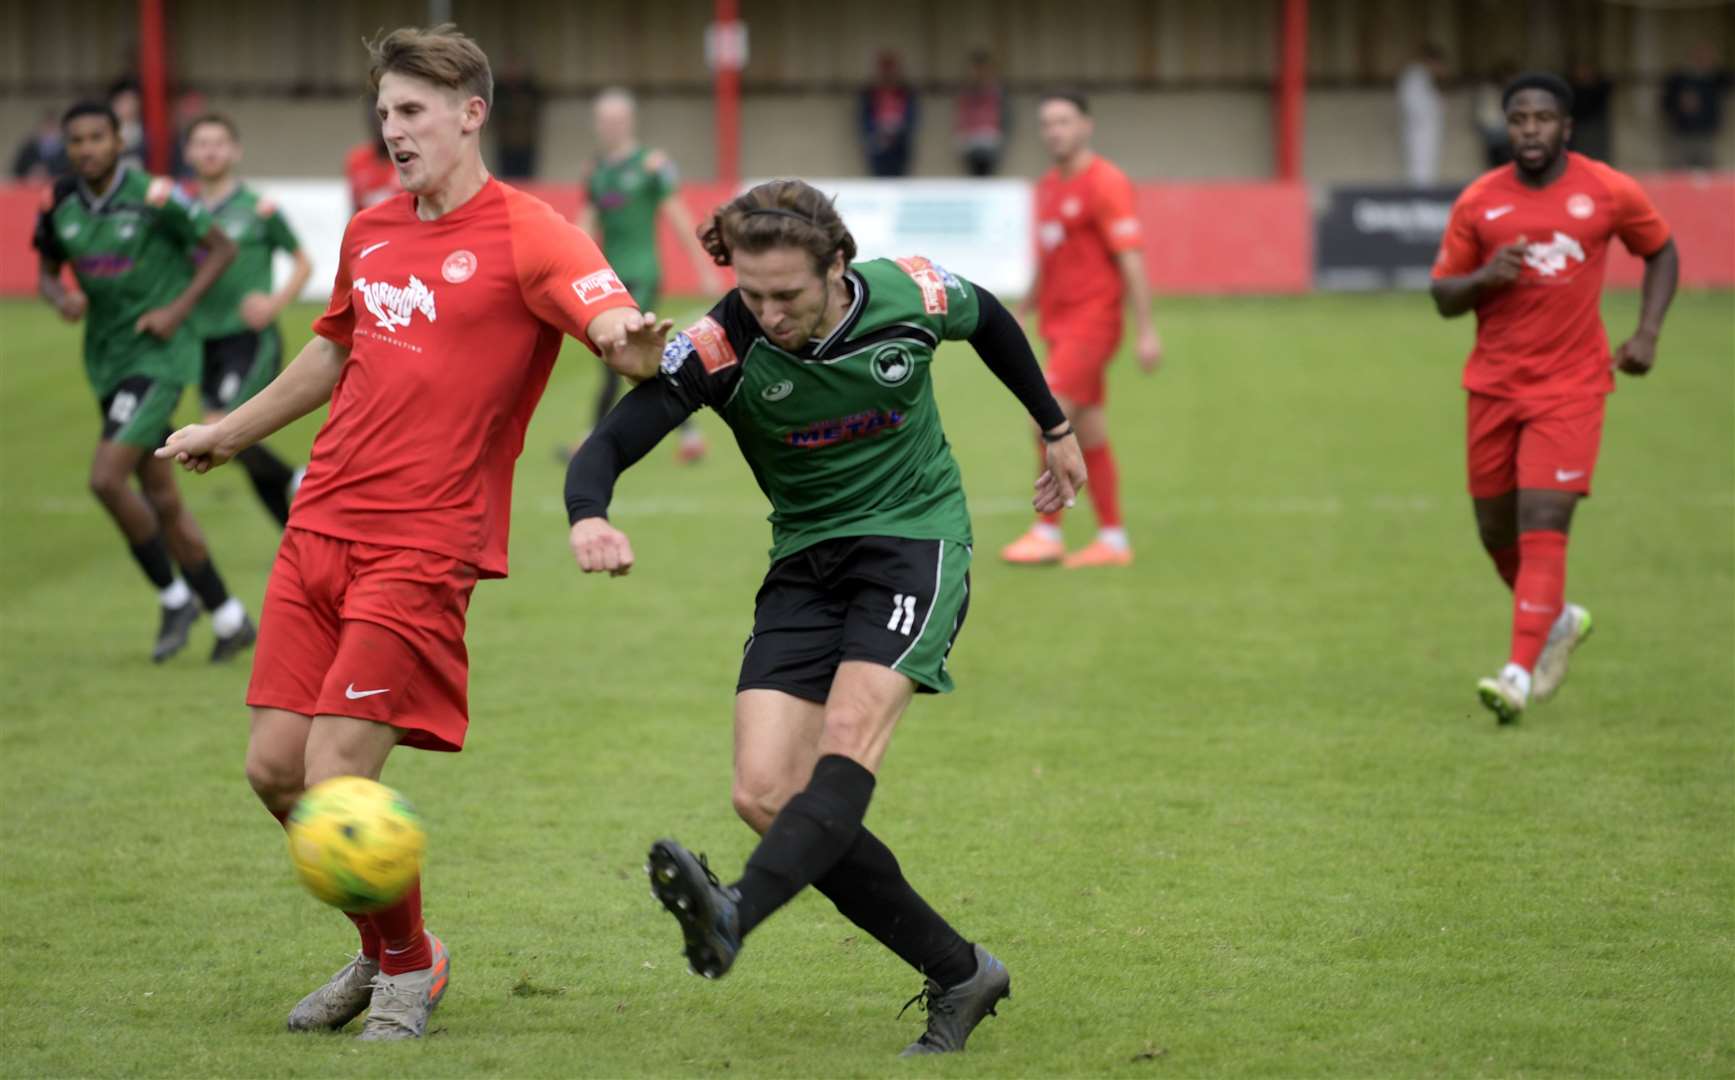 Isthmian League sides Phoenix Sports and Hythe Town in action earlier this season - have they played their last games of the campaign? Picture: Barry Goodwin (42535923)